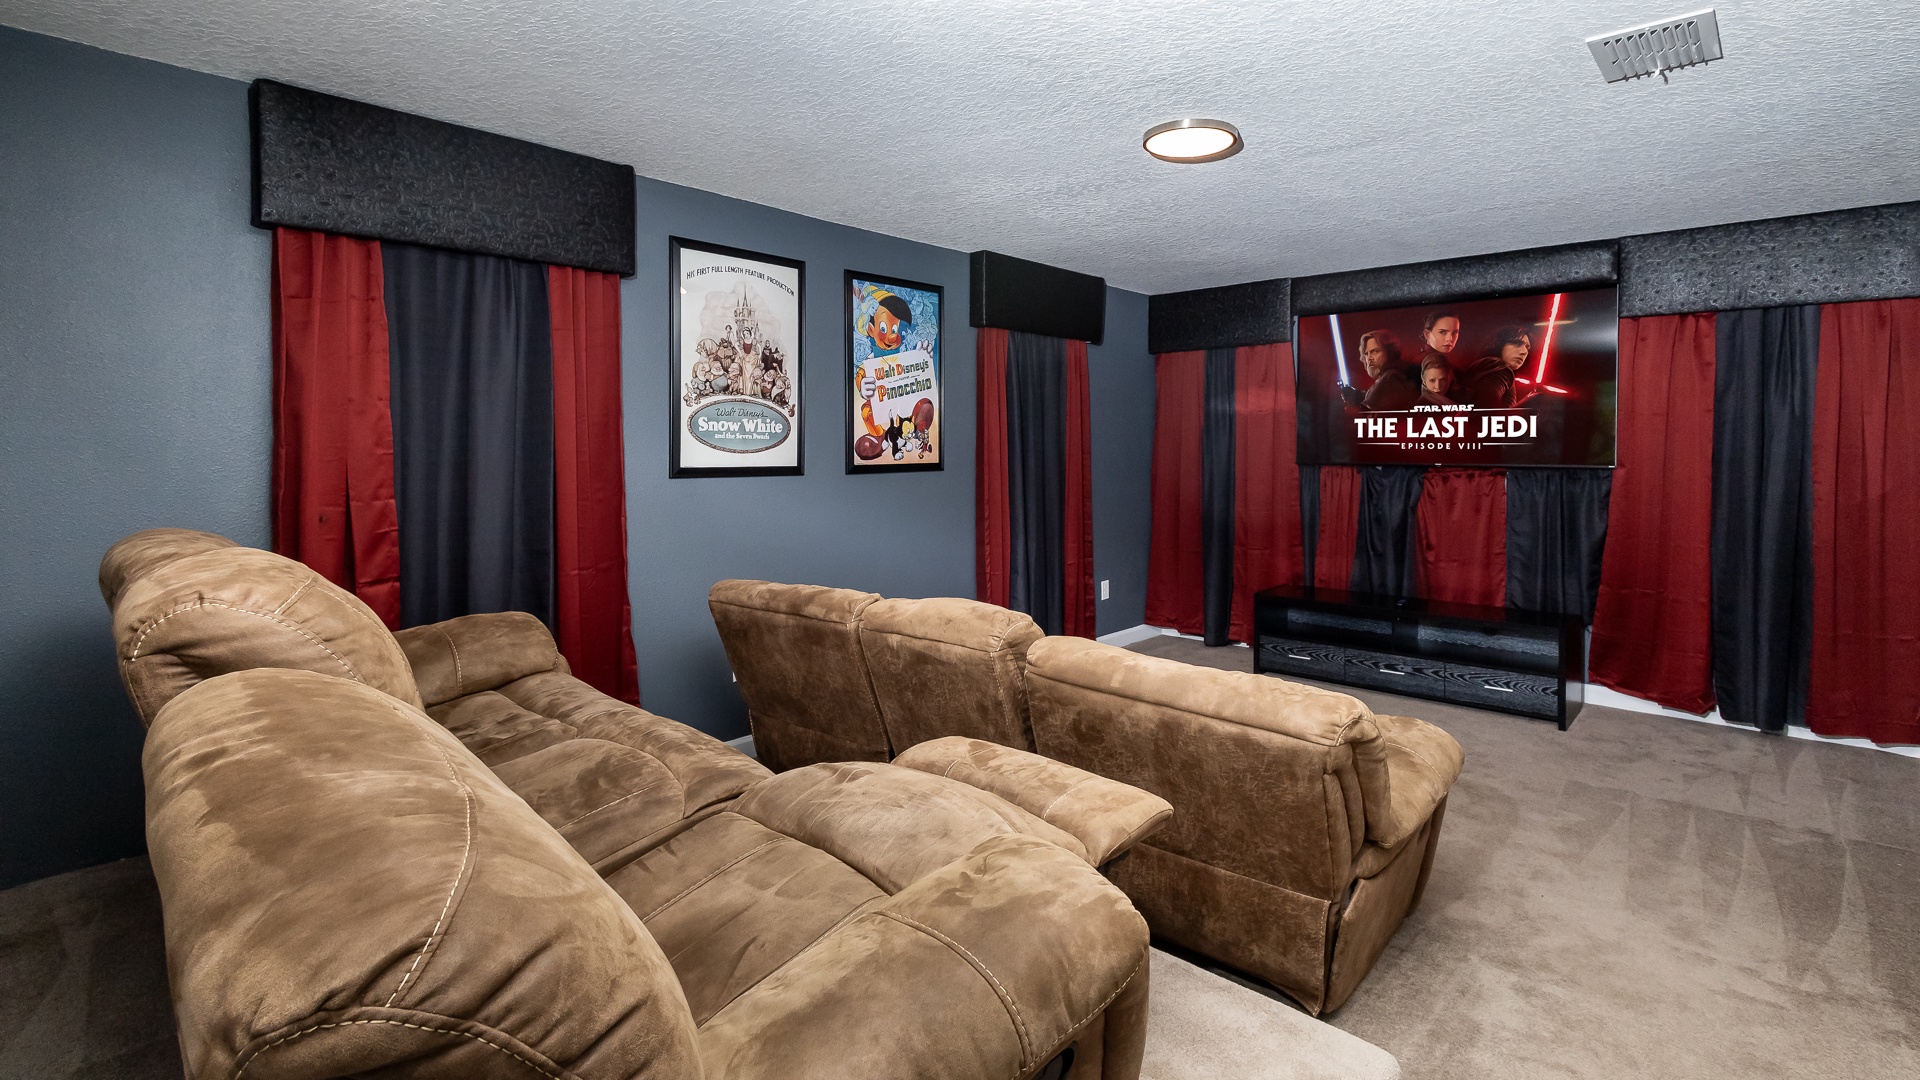 Enjoy cinematic luxury with your own private movie theater room